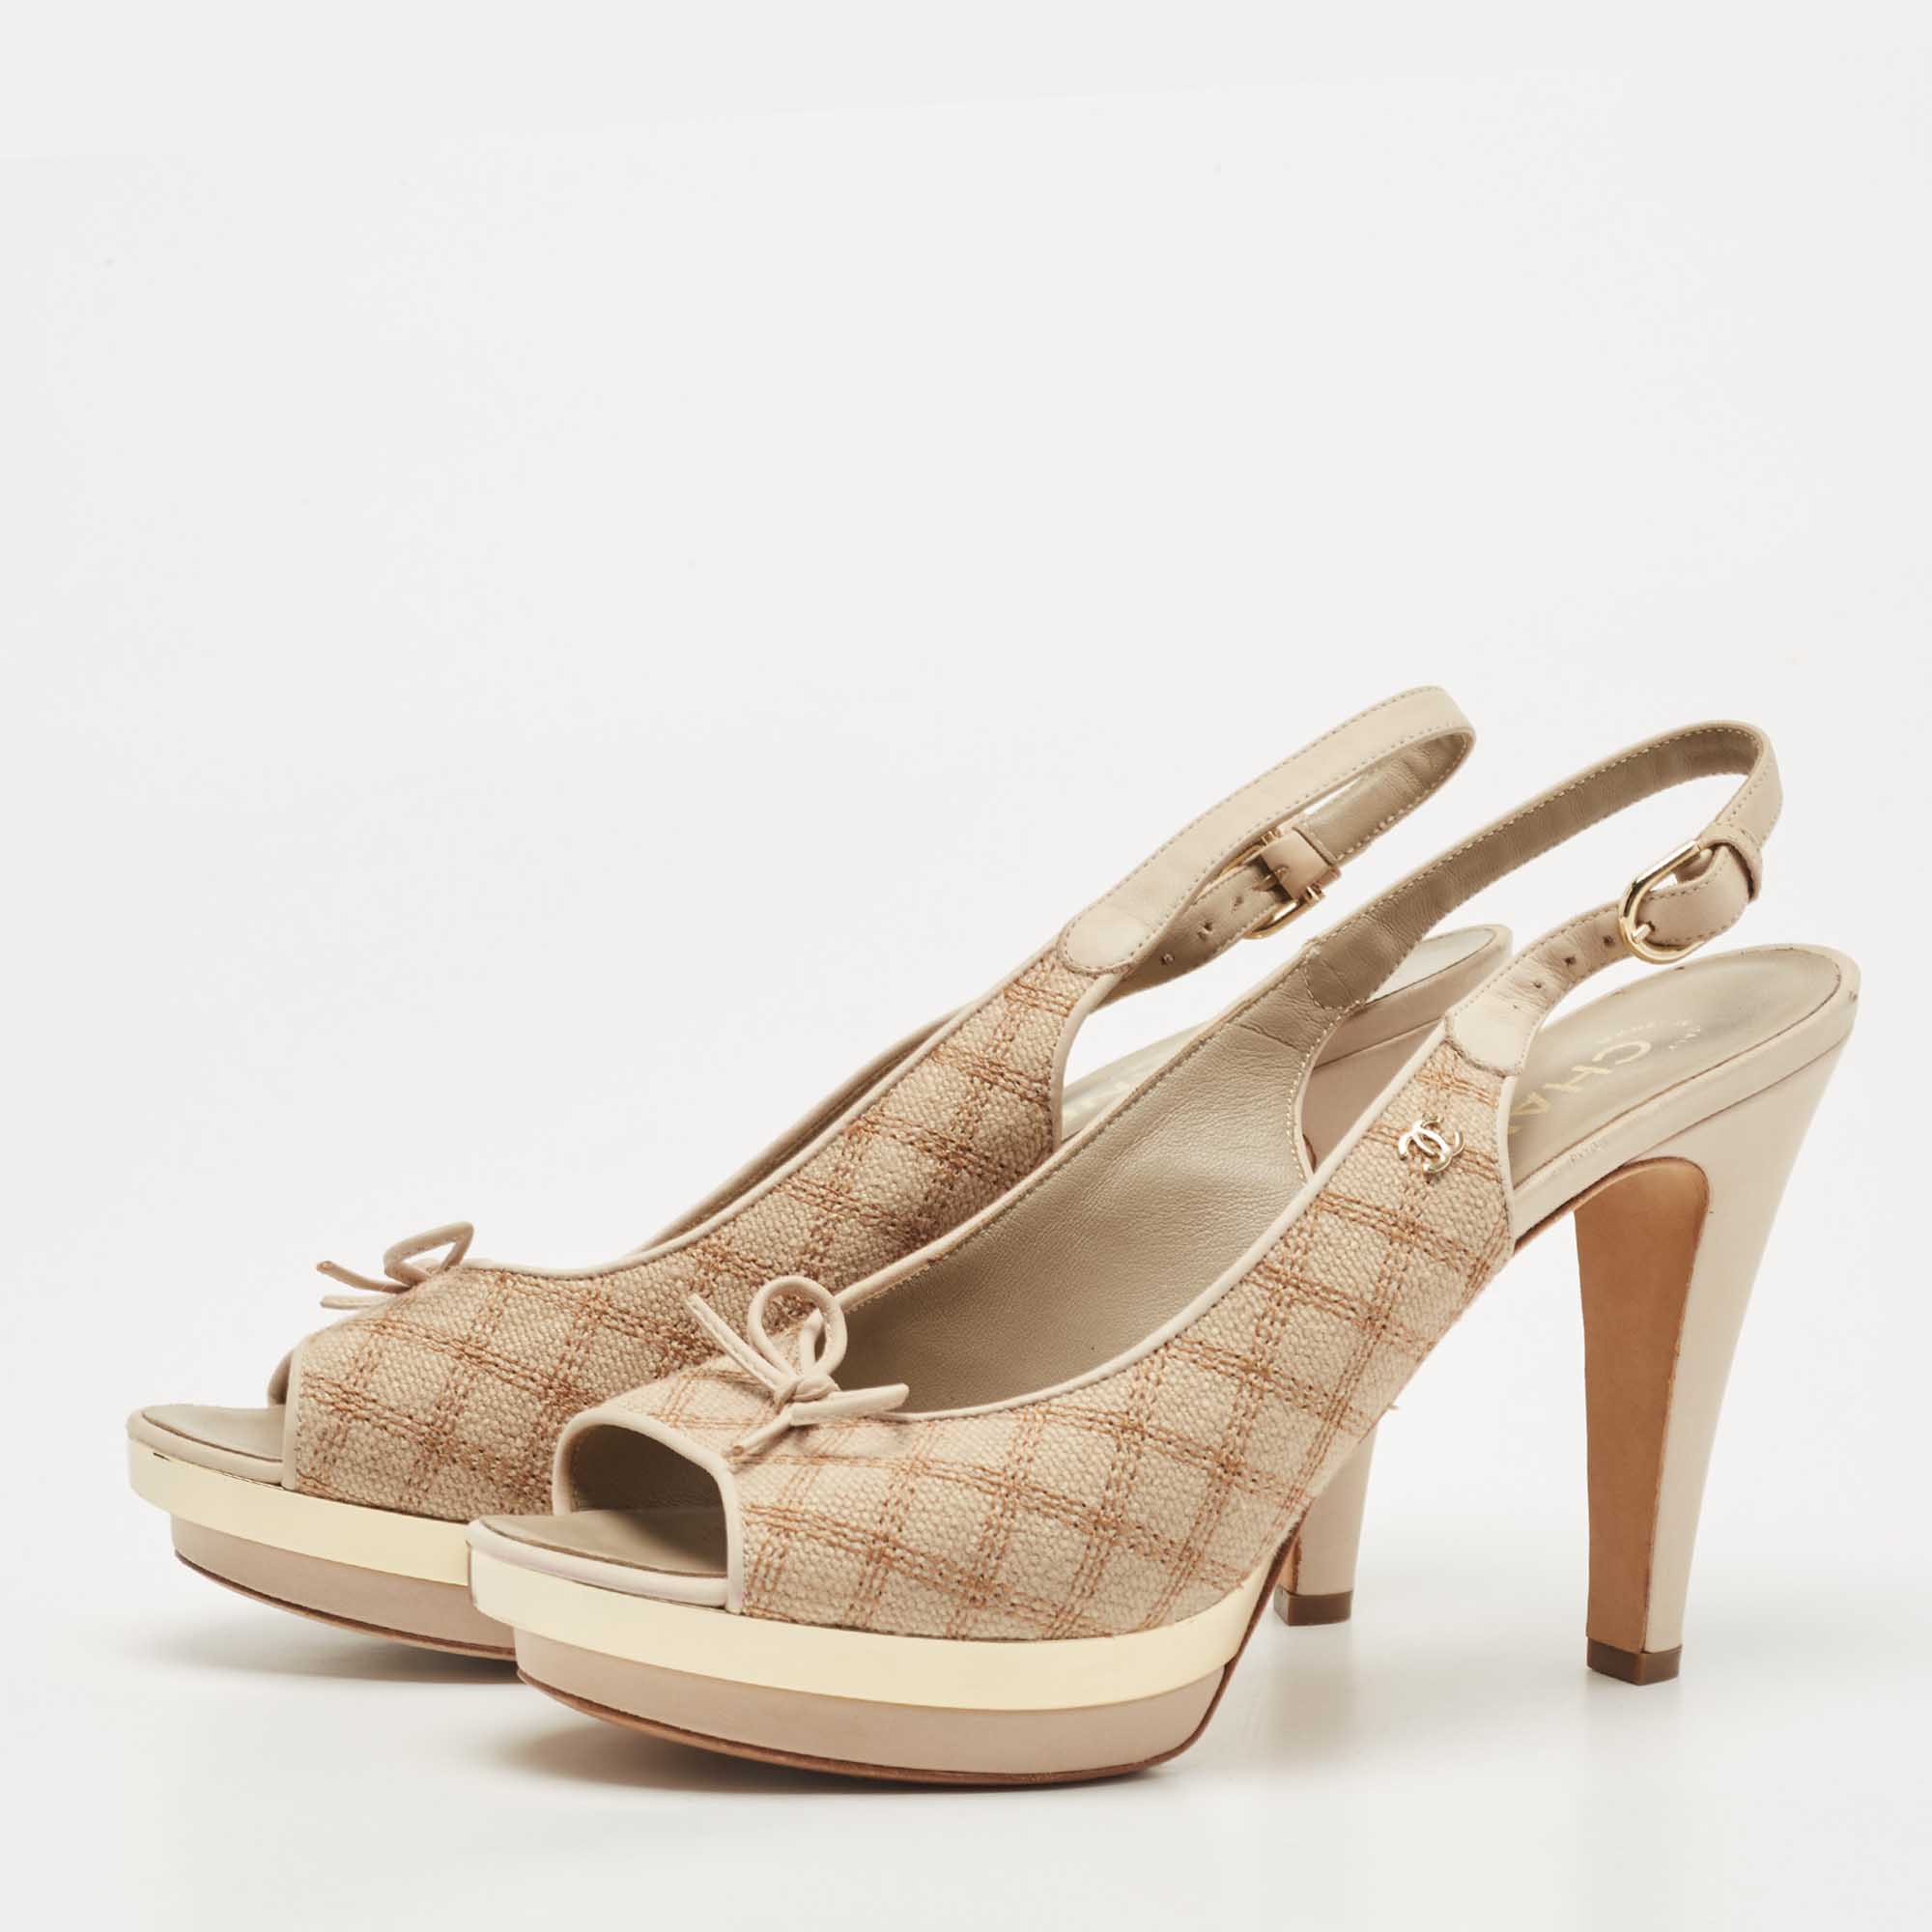 

Chanel Cream/Beige Canvas And Leather CC Bow Peep Toe Platform Slingback Sandals Size